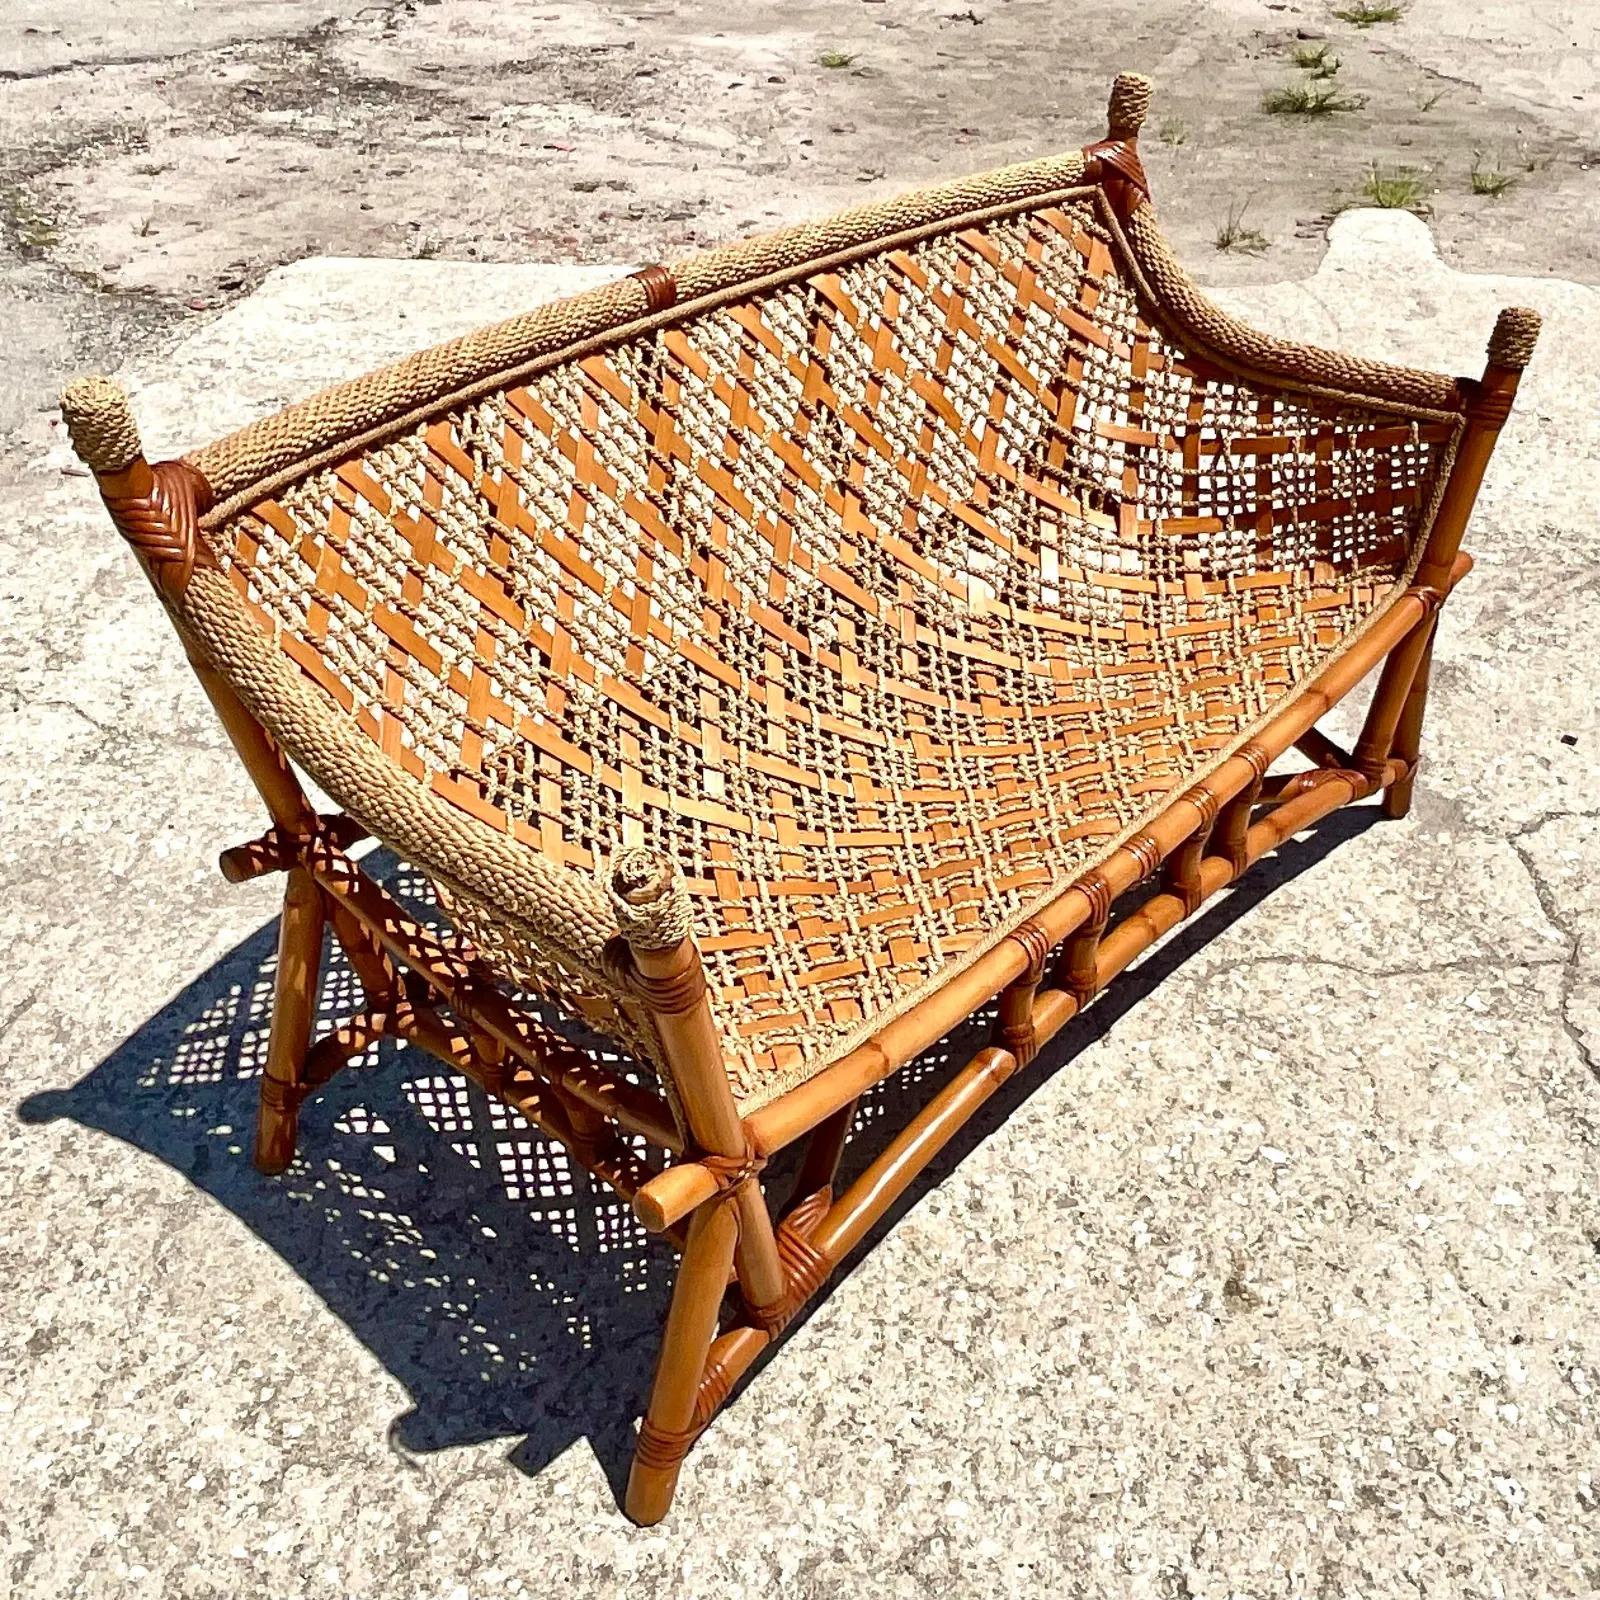 Fantastic vintage Coastal sofa. A chic sling design with woven leather and jute straps. Rests in a thick rattan frame. A super sexy shape. Acquired from a Palm beach estate.